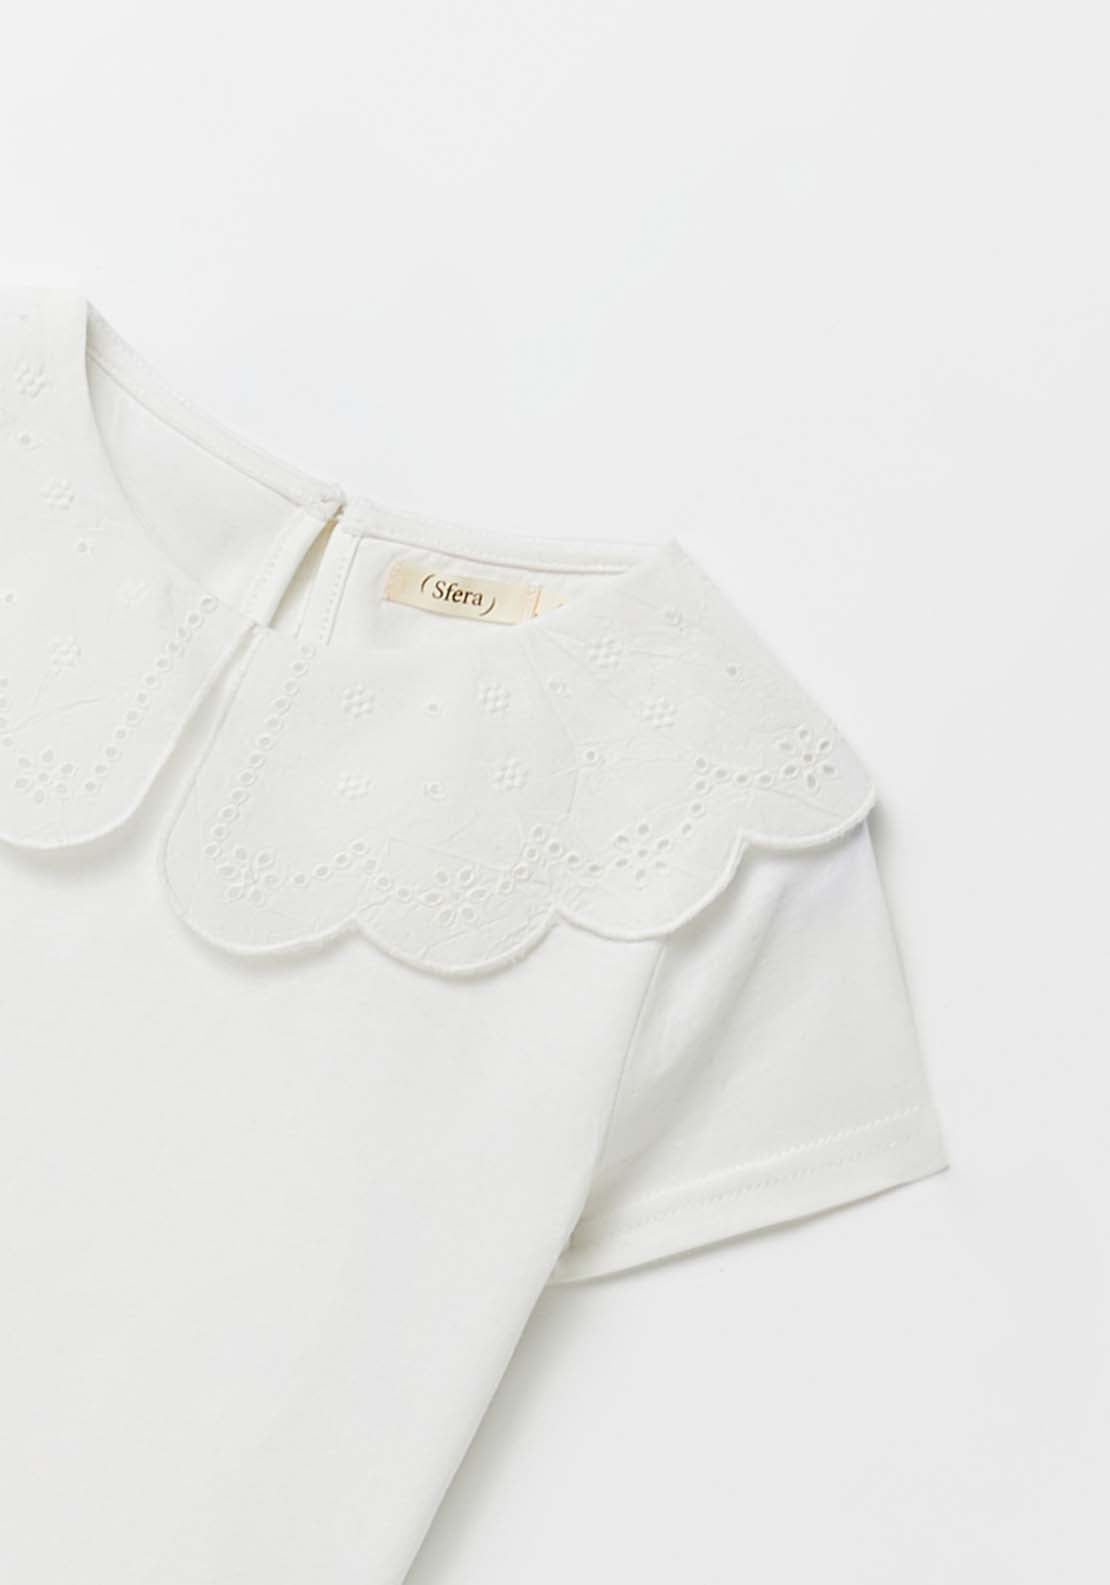 Sfera Embroidered Collar T-Shirt - White 7 Shaws Department Stores